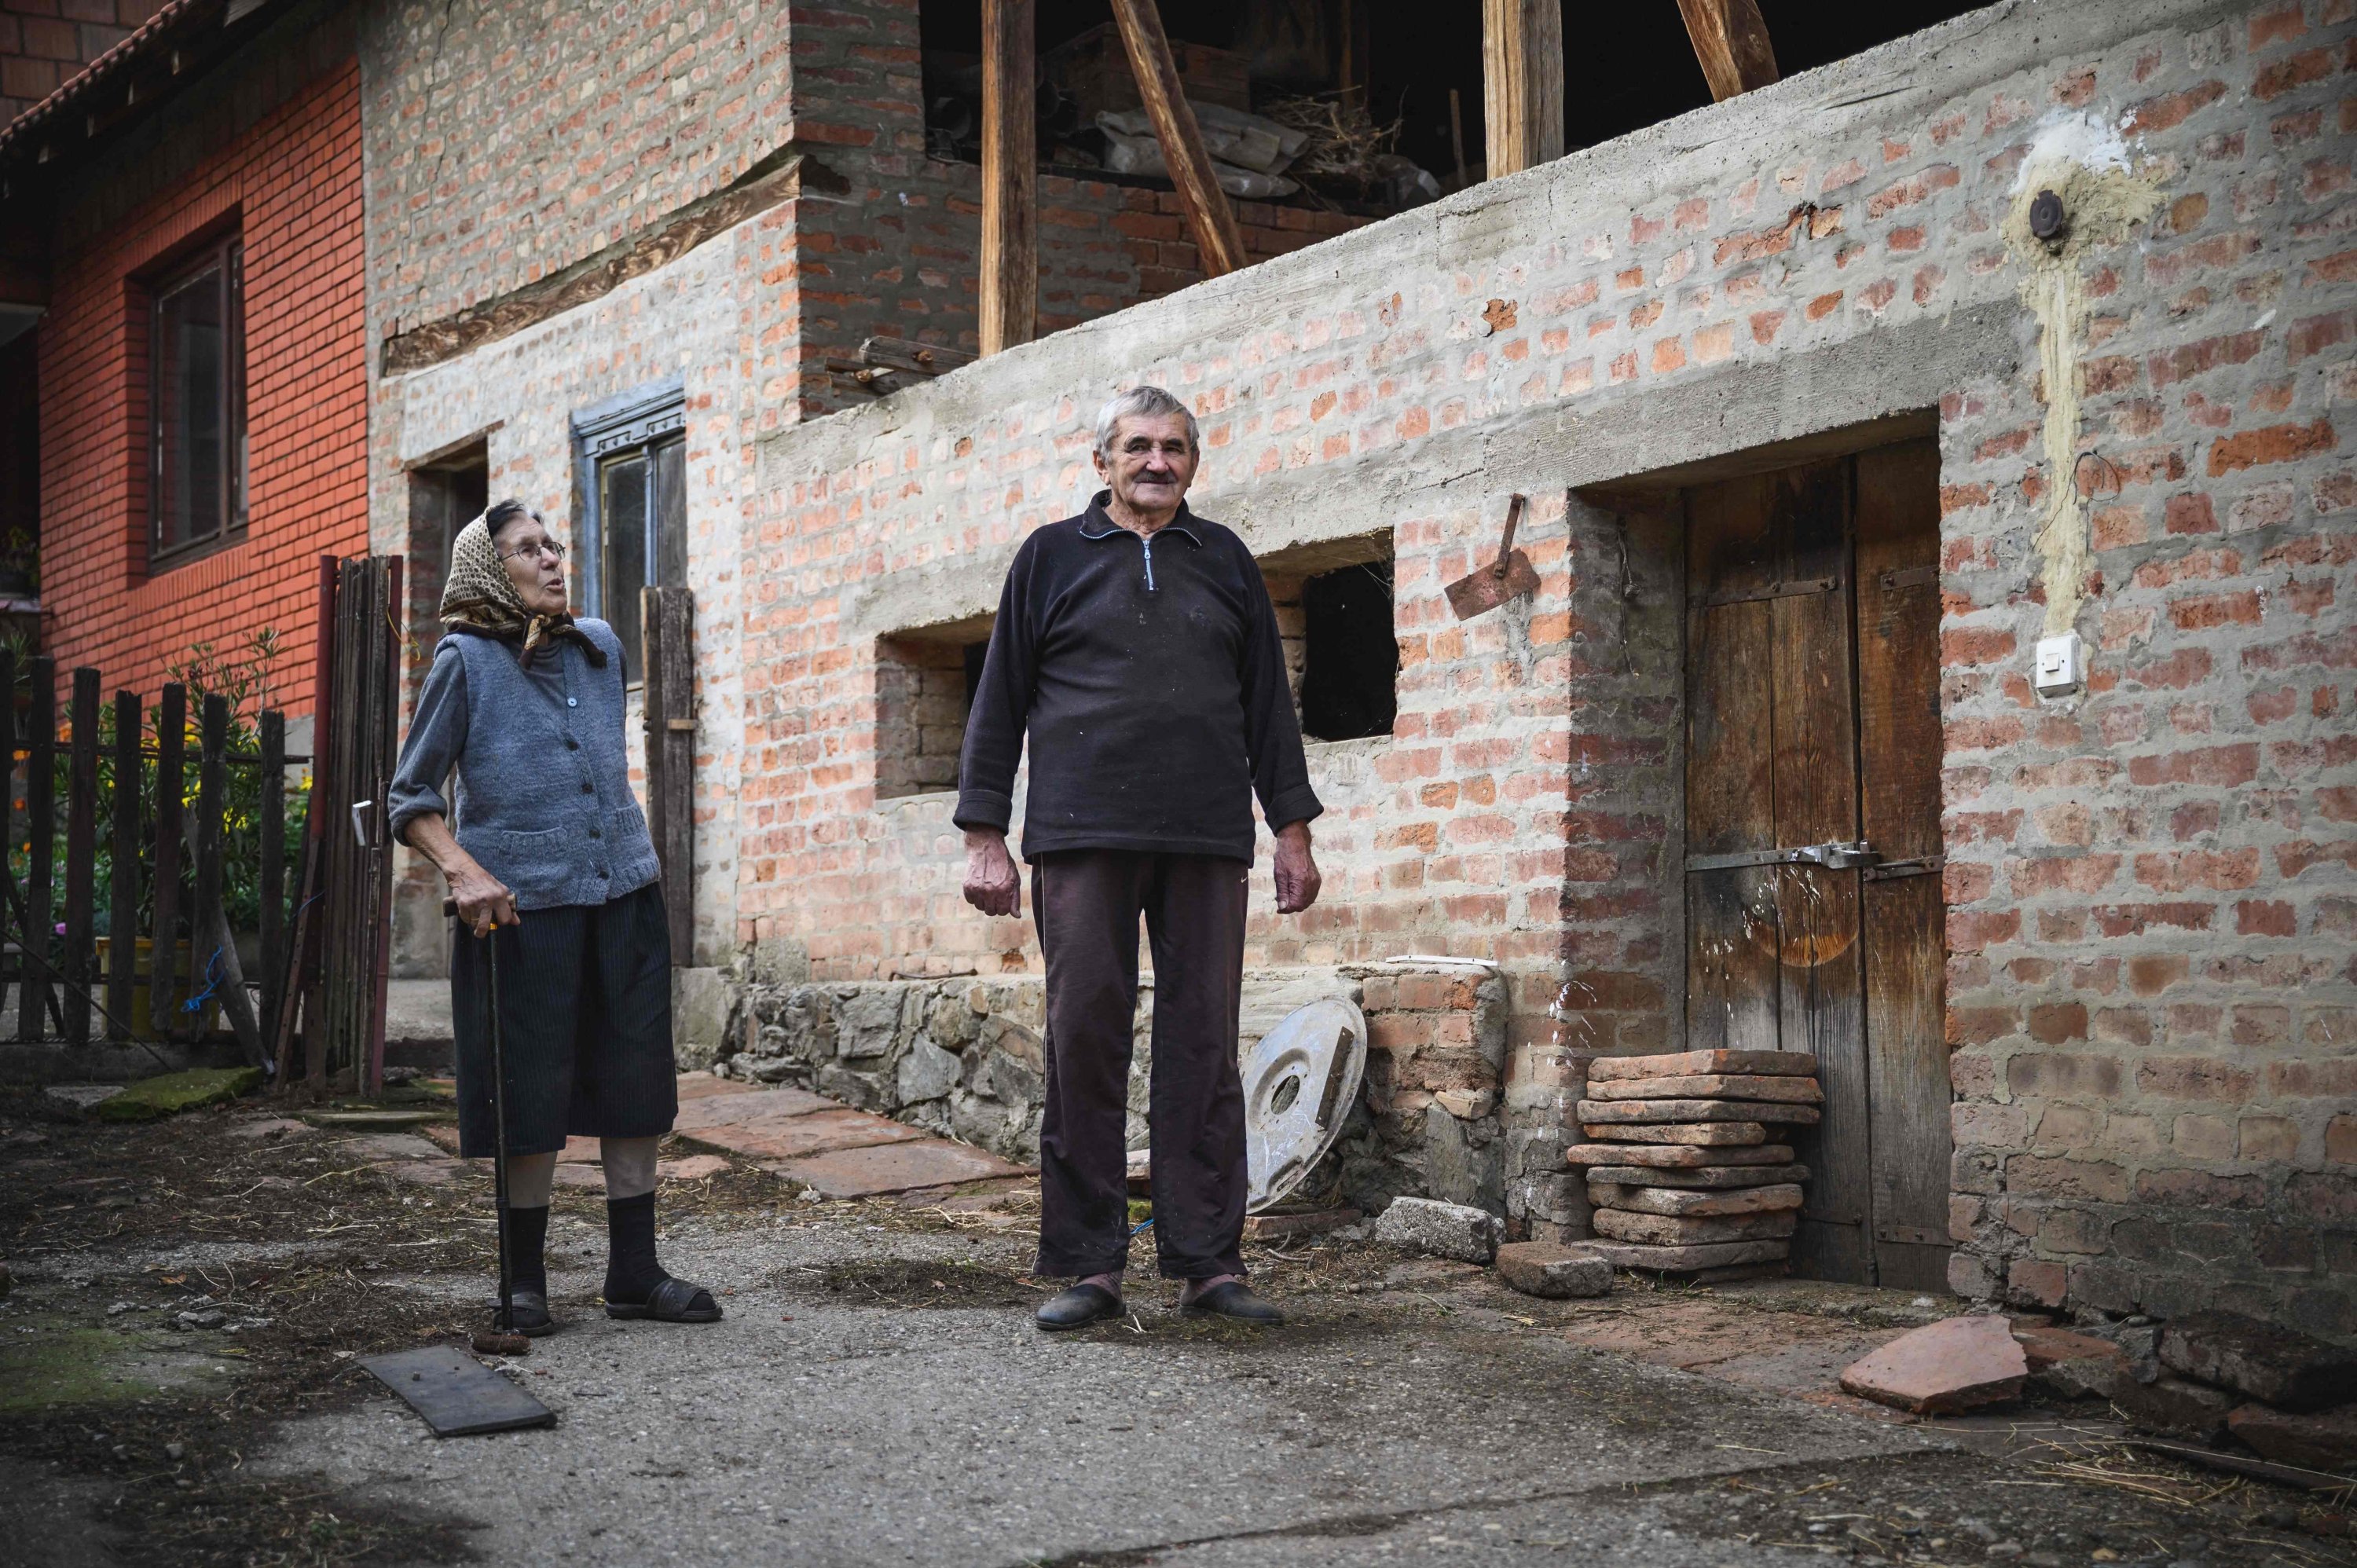 Jezda Ivanovic and his wife Verica stand in their yard next to a small pile of Roman bricks, in central Serbia's Stari Kostolac on Dec. 3, 2021. (AFP Photo)